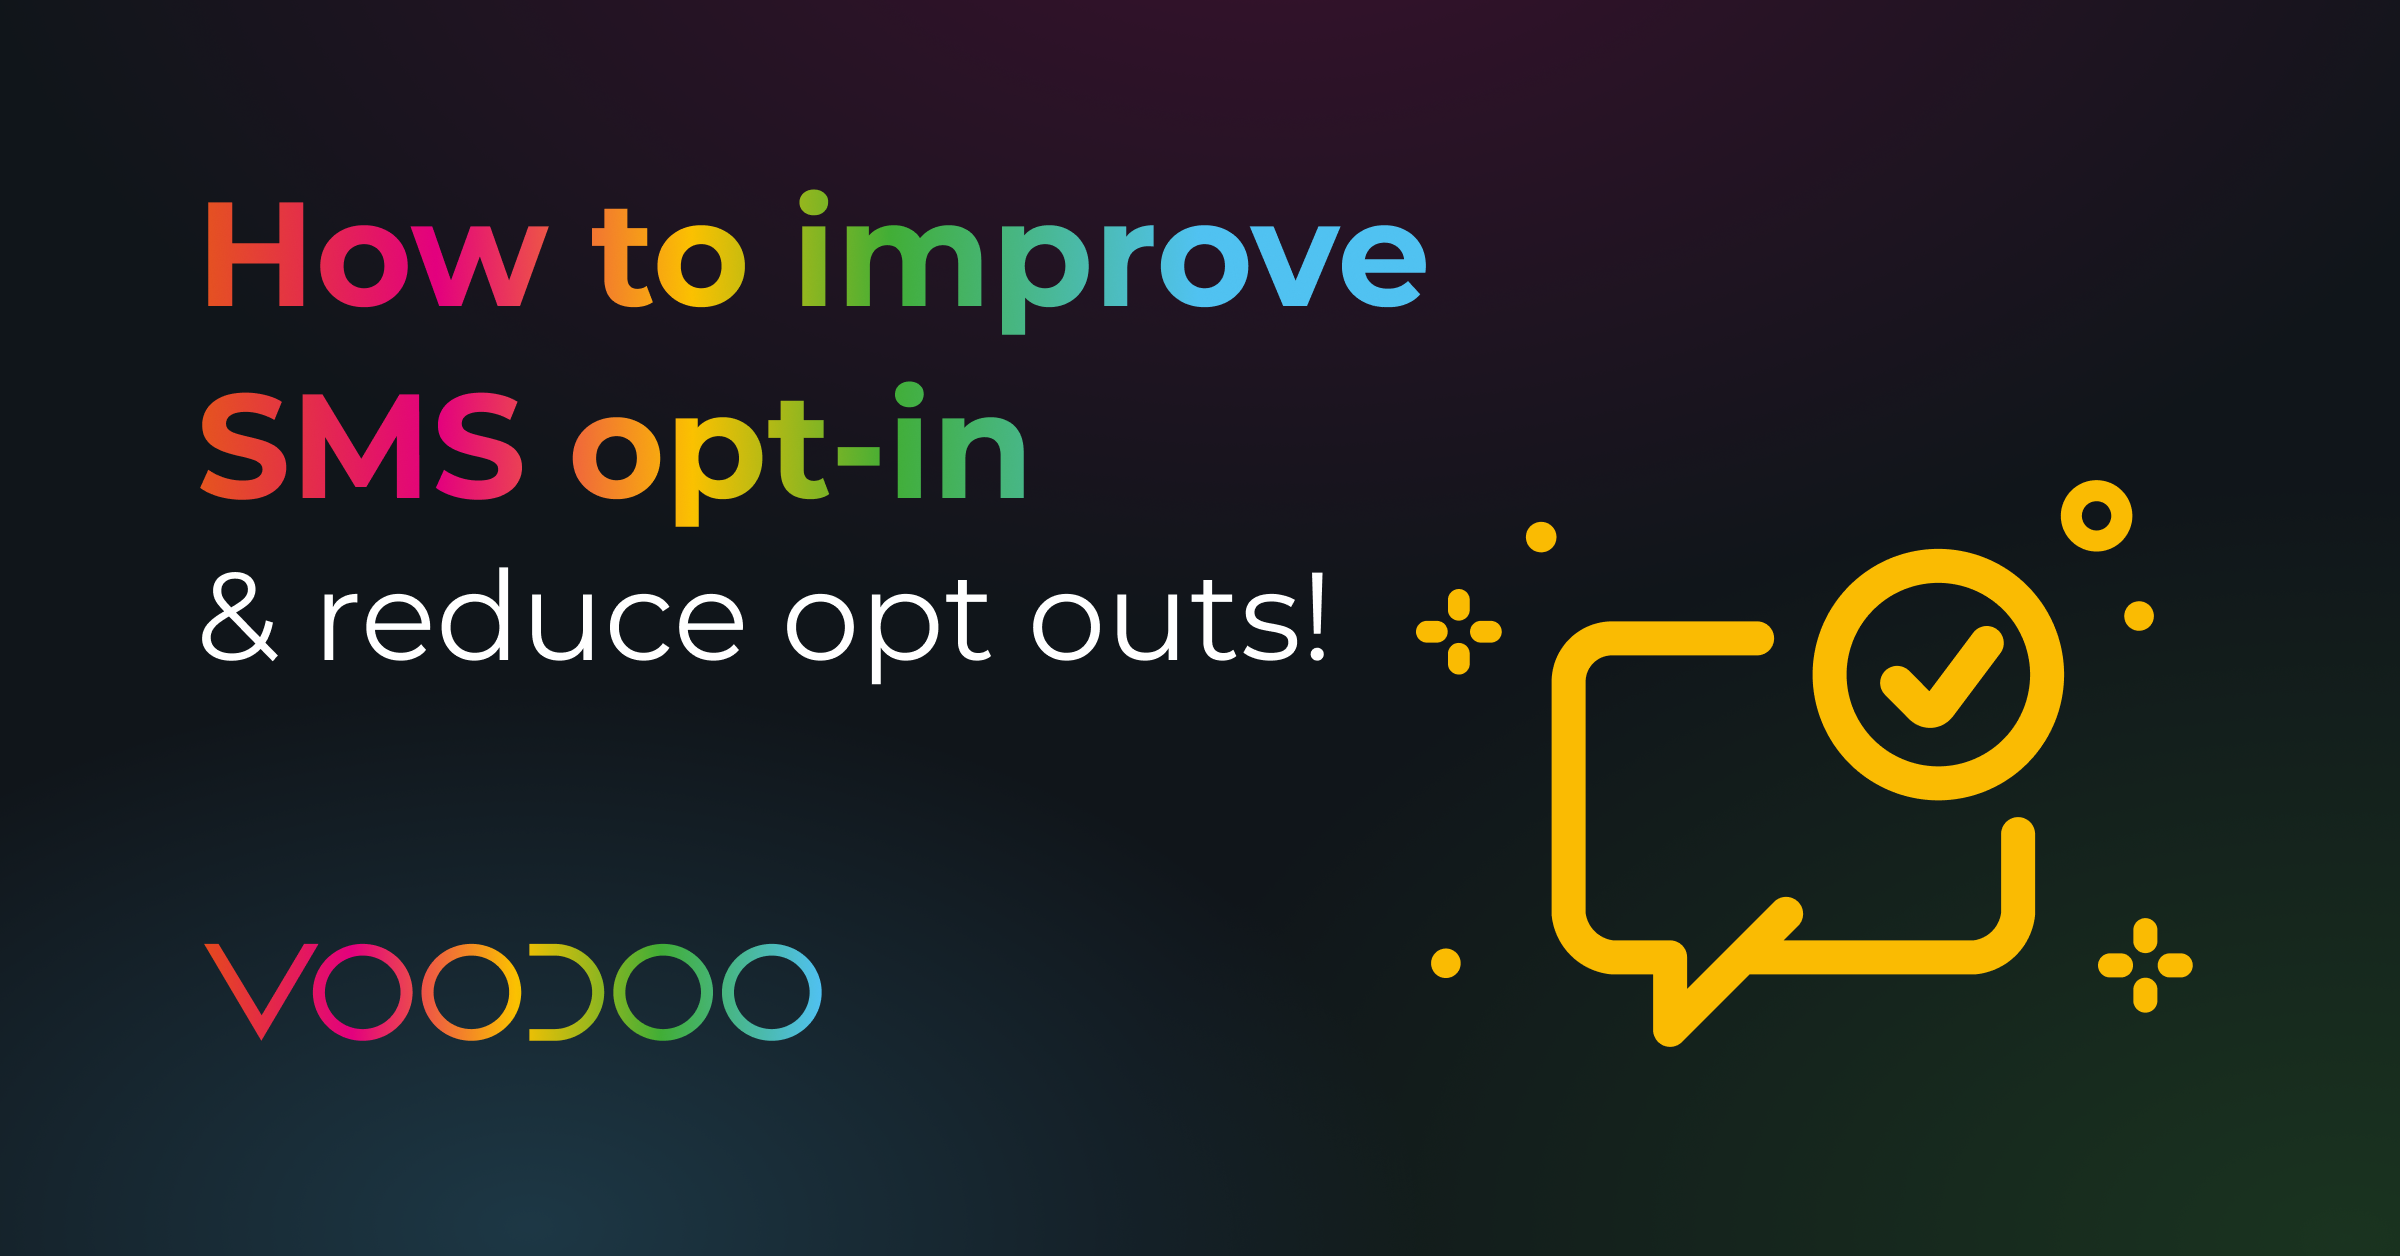 How to improve SMS opt-in (and reduce opt outs!)